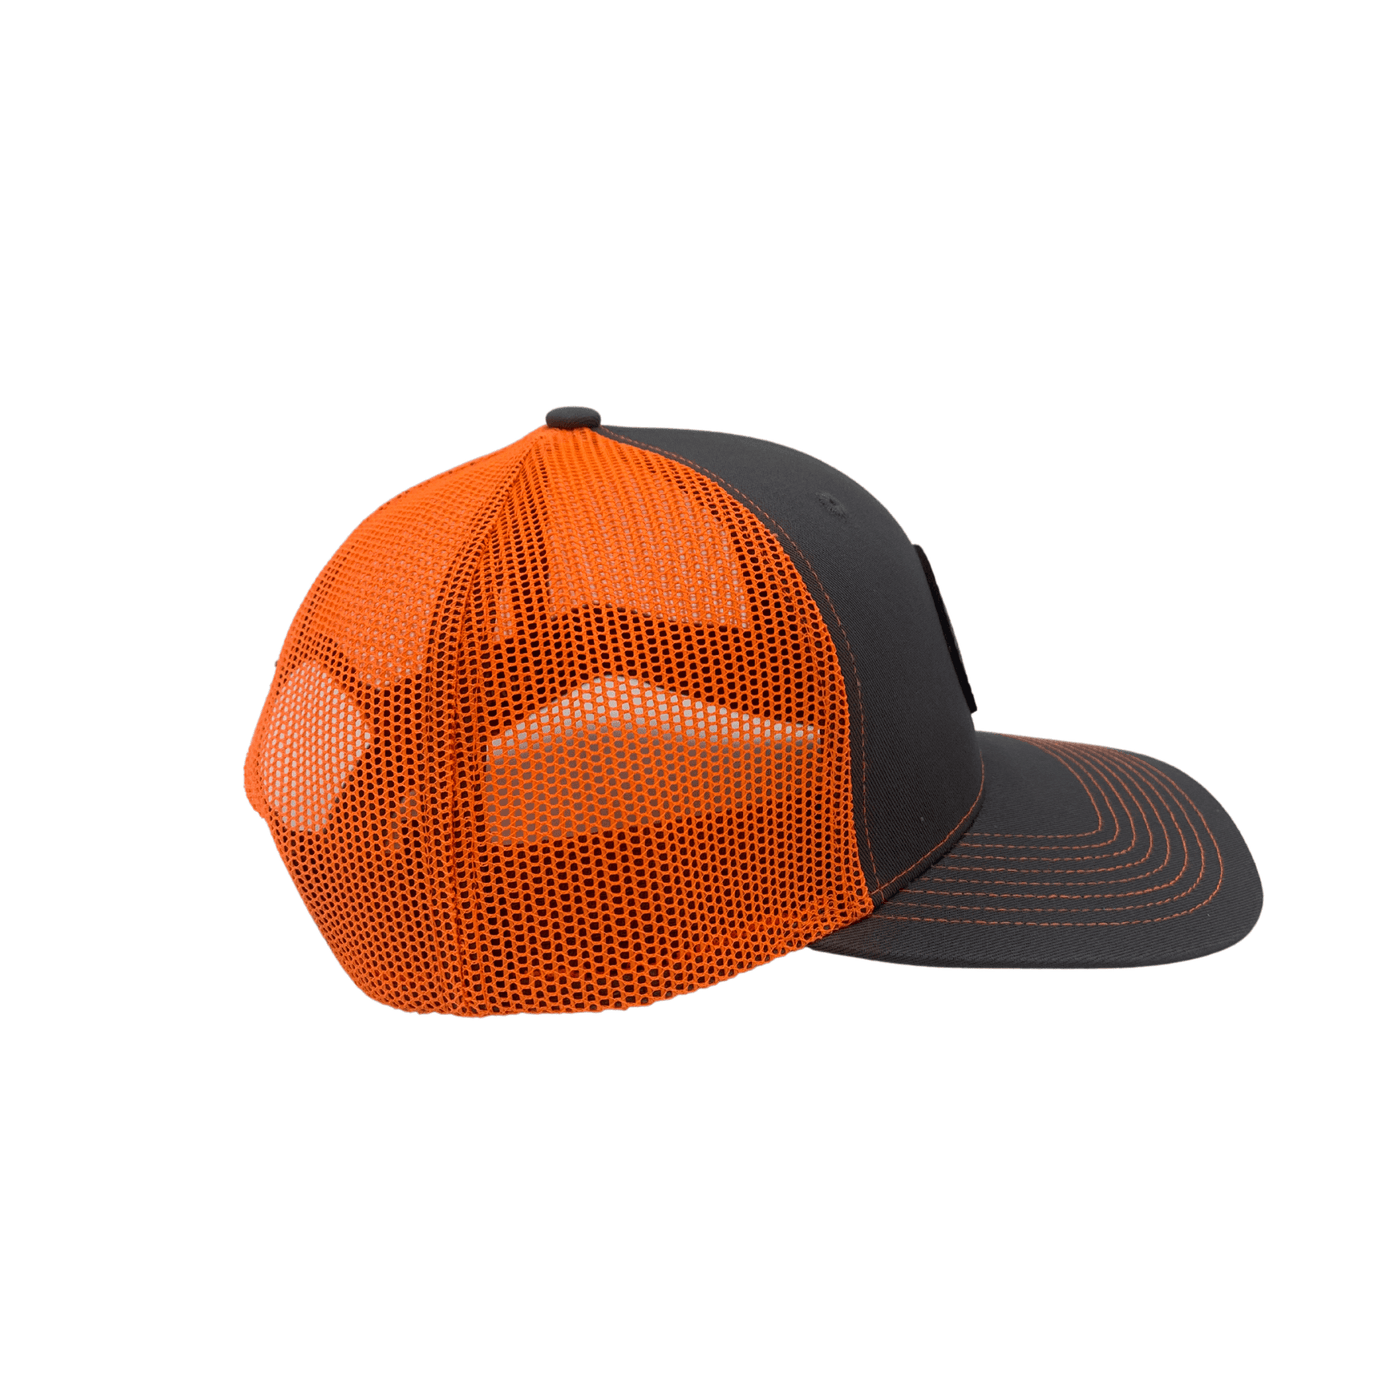 Custom Cap with Round Leather Patch--Orange - Carry The Load Shop